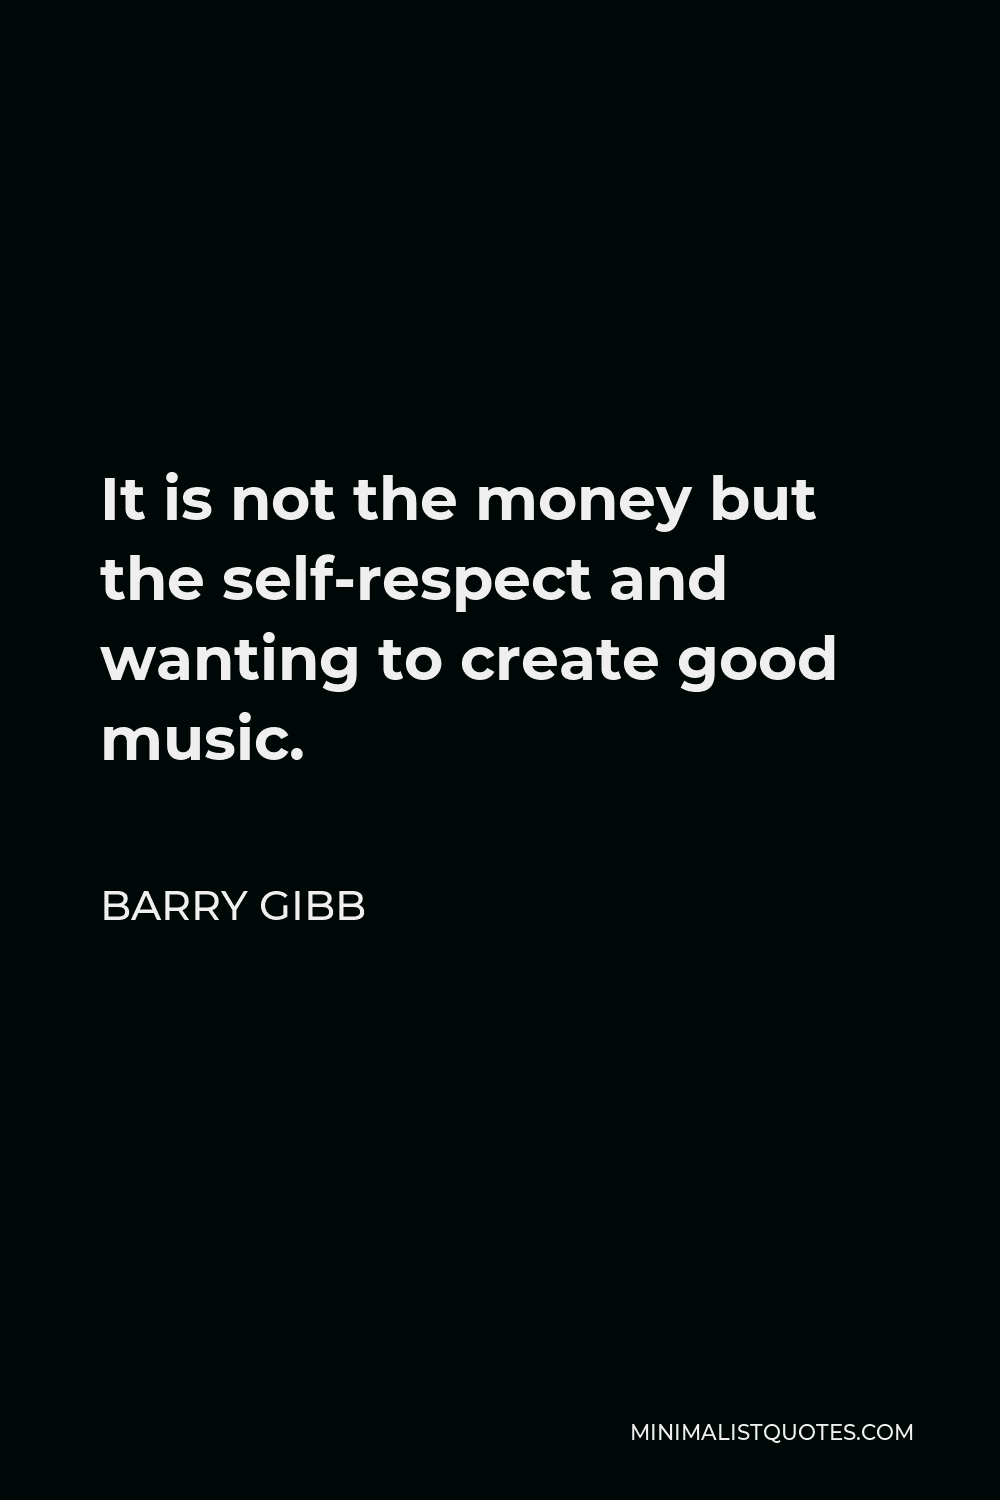 Barry Gibb Quote - It is not the money but the self-respect and wanting to create good music.